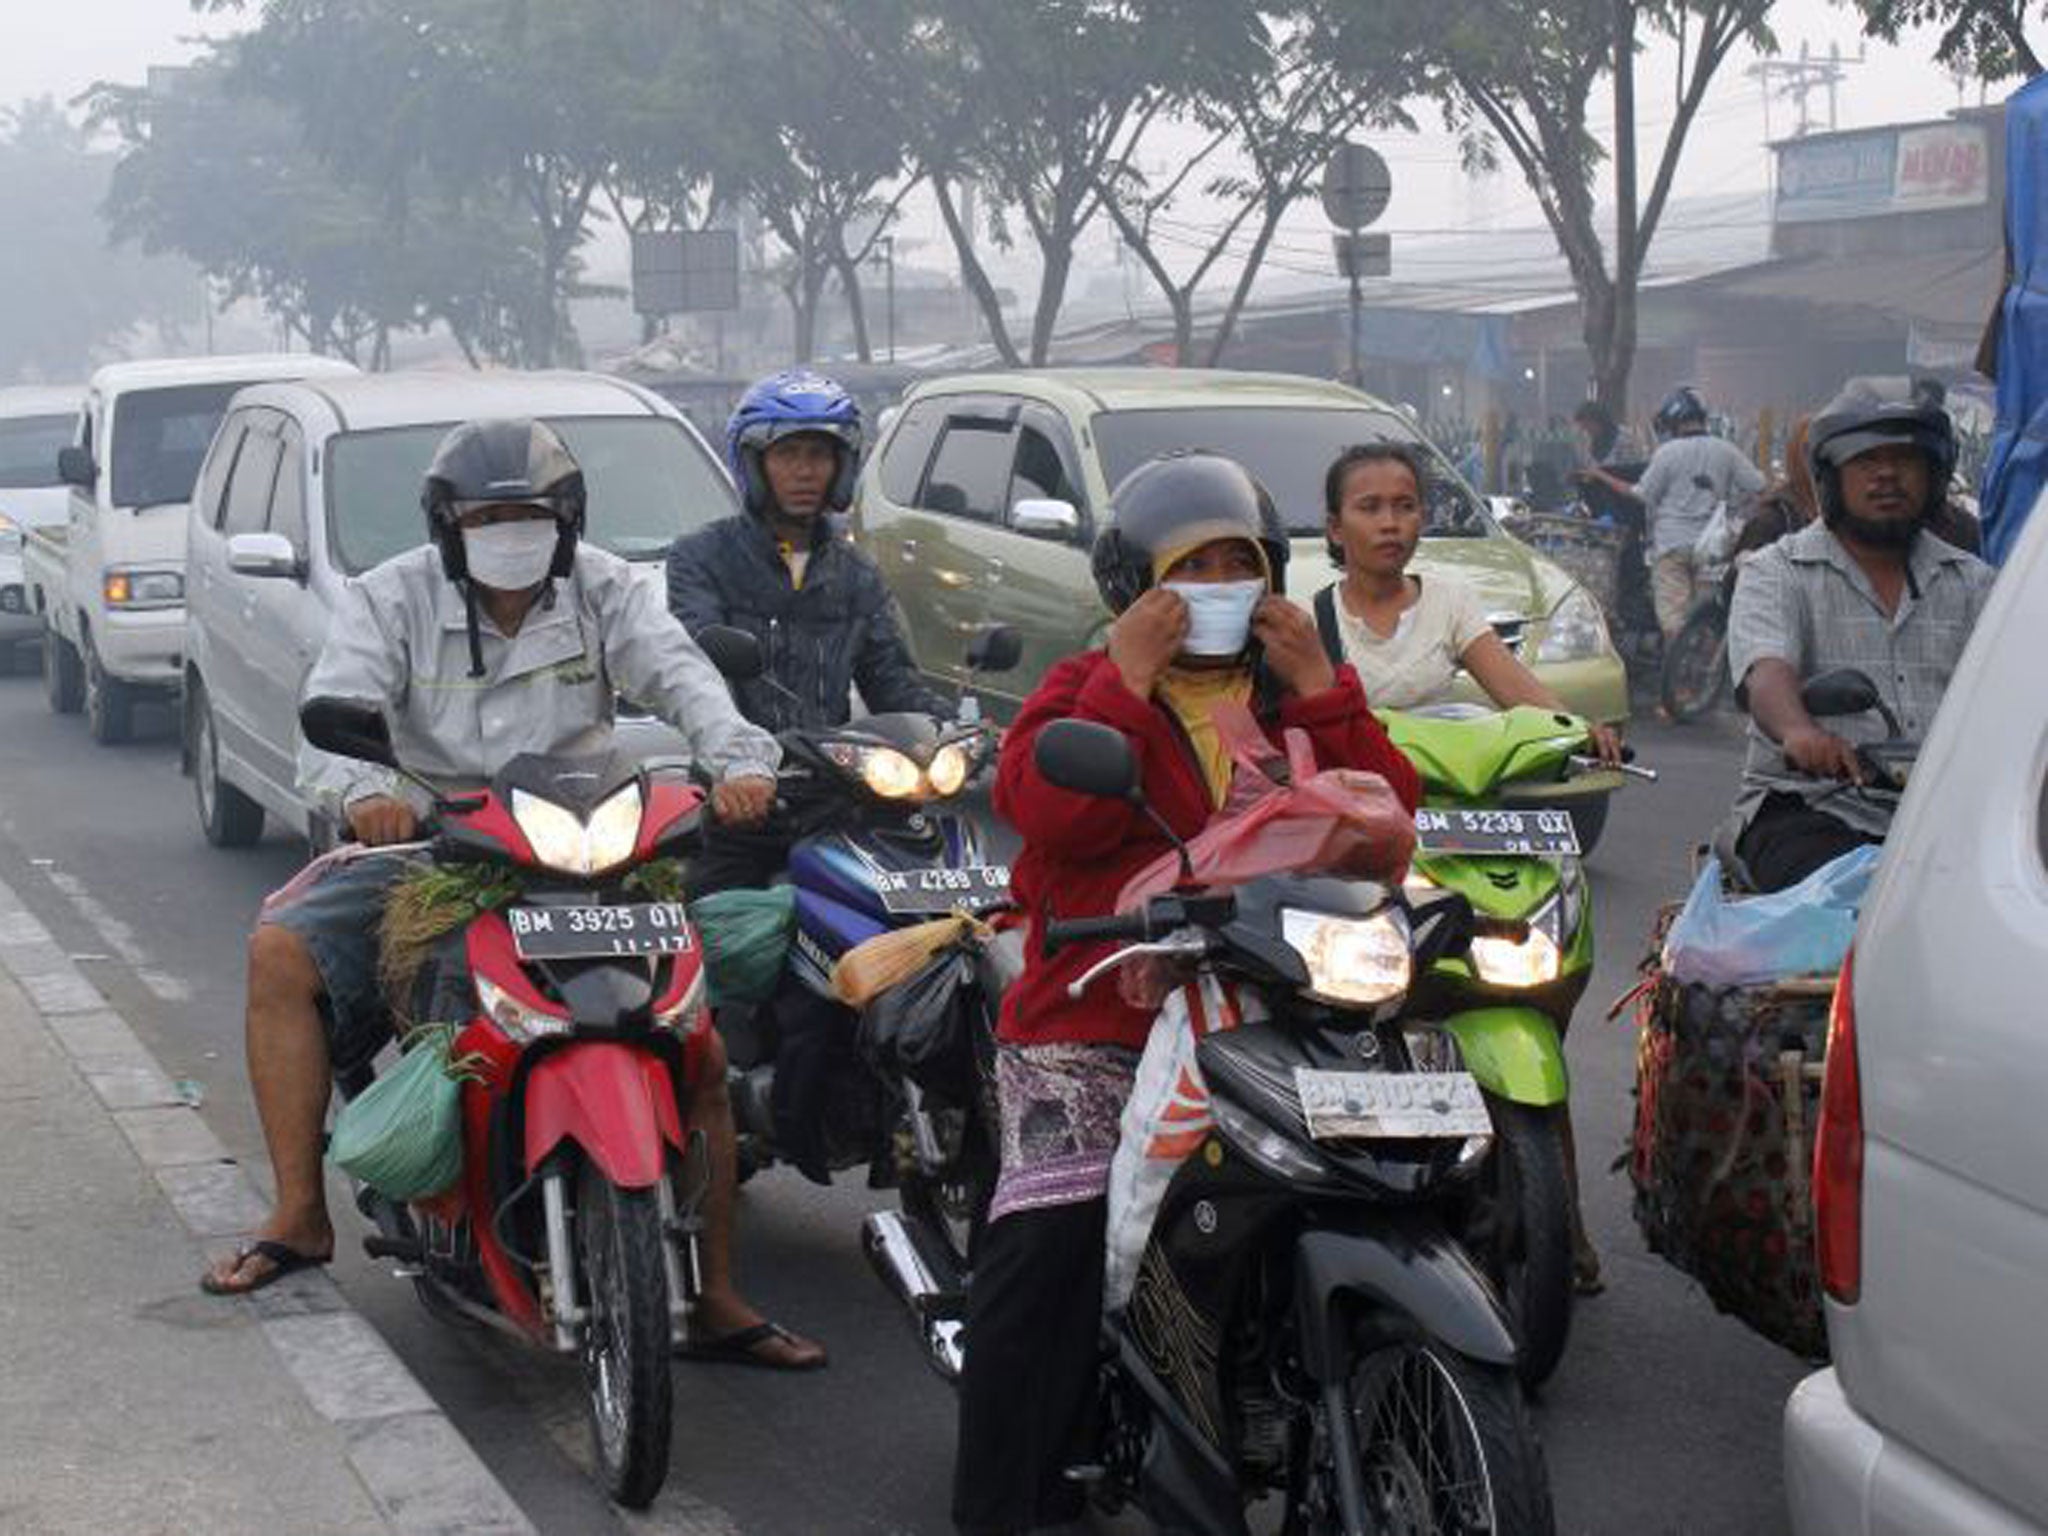 Indonesian motorists wear masks as haze continues to blanket the city